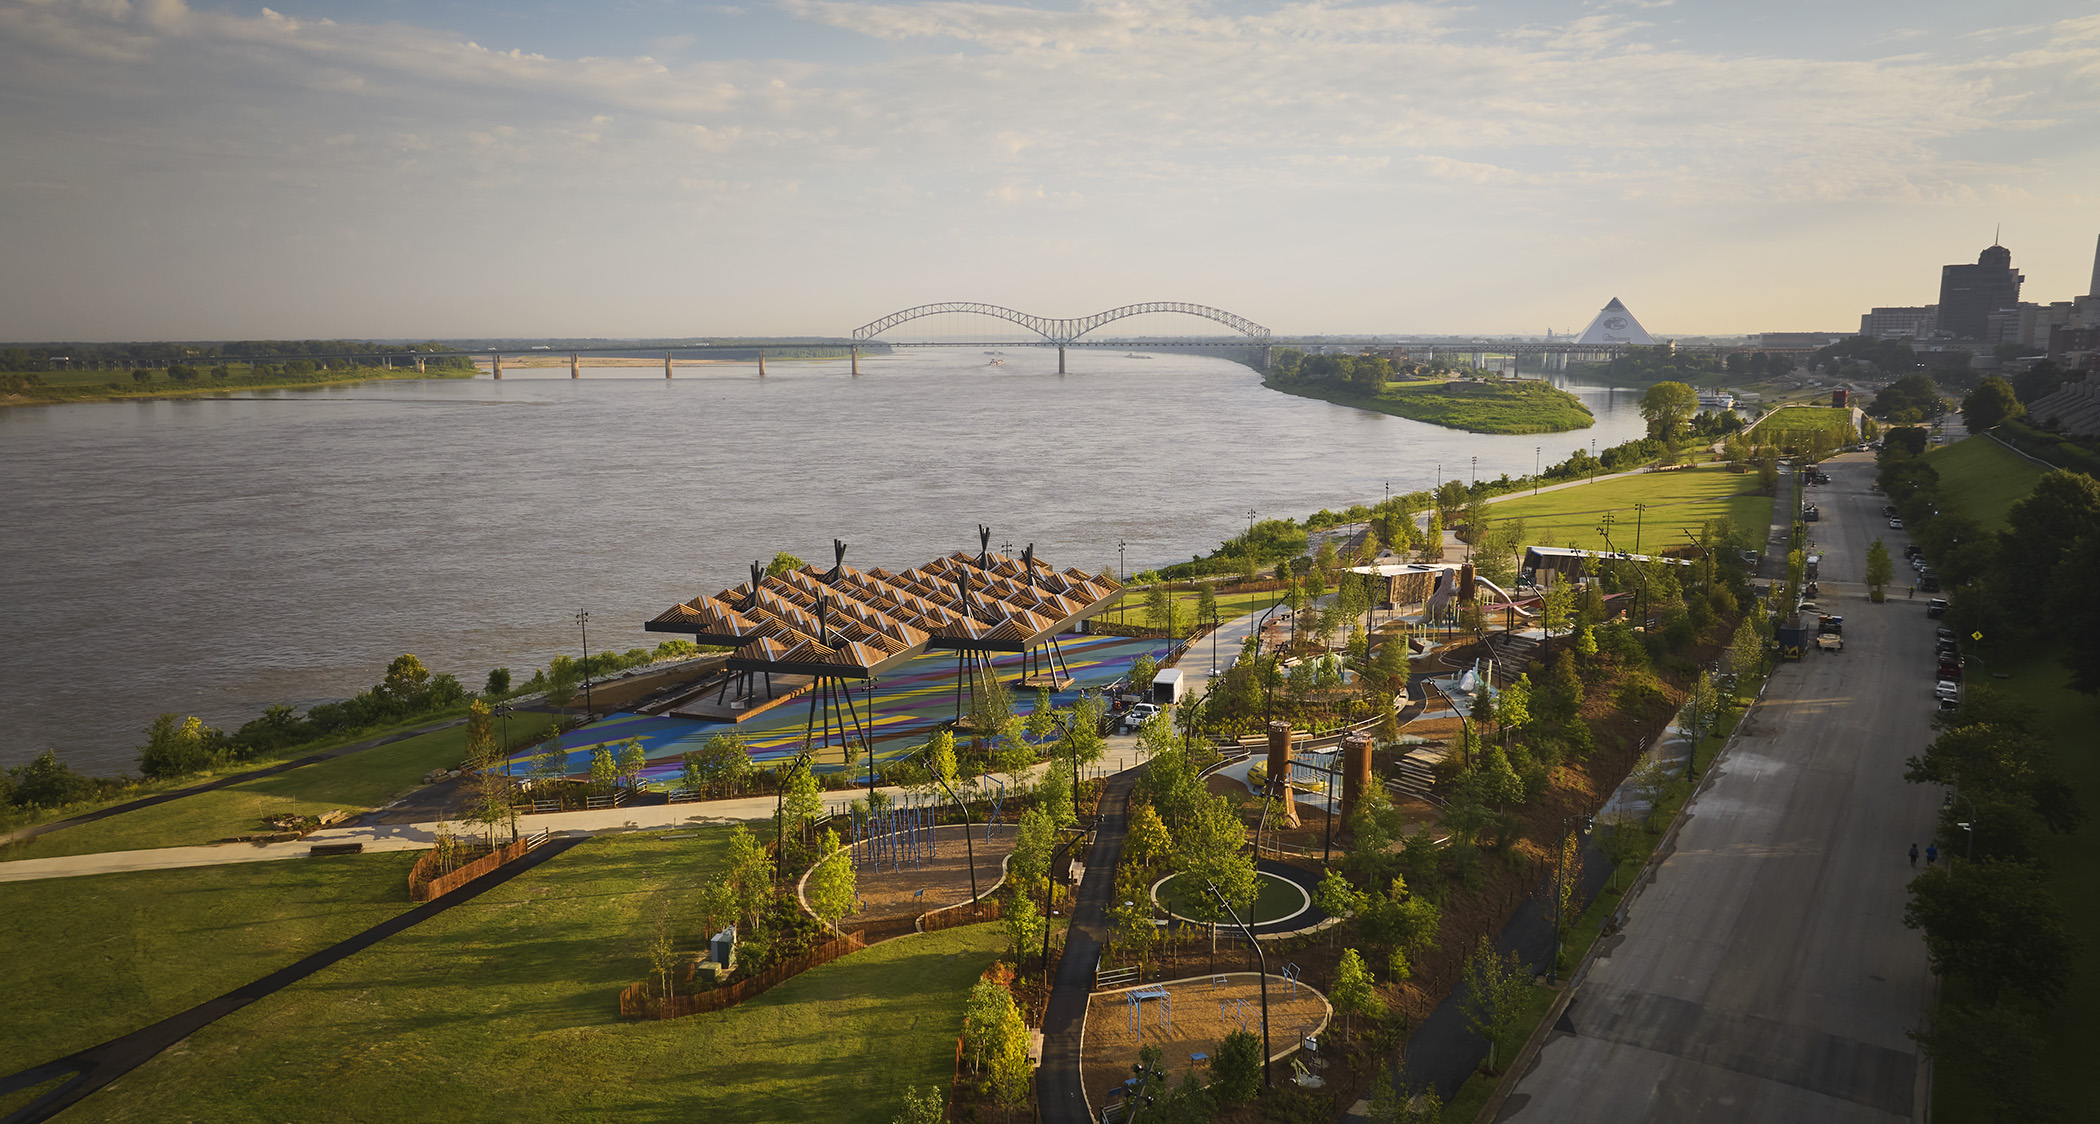 Fridays at the Front' return to Louisville's Waterfront Park next week